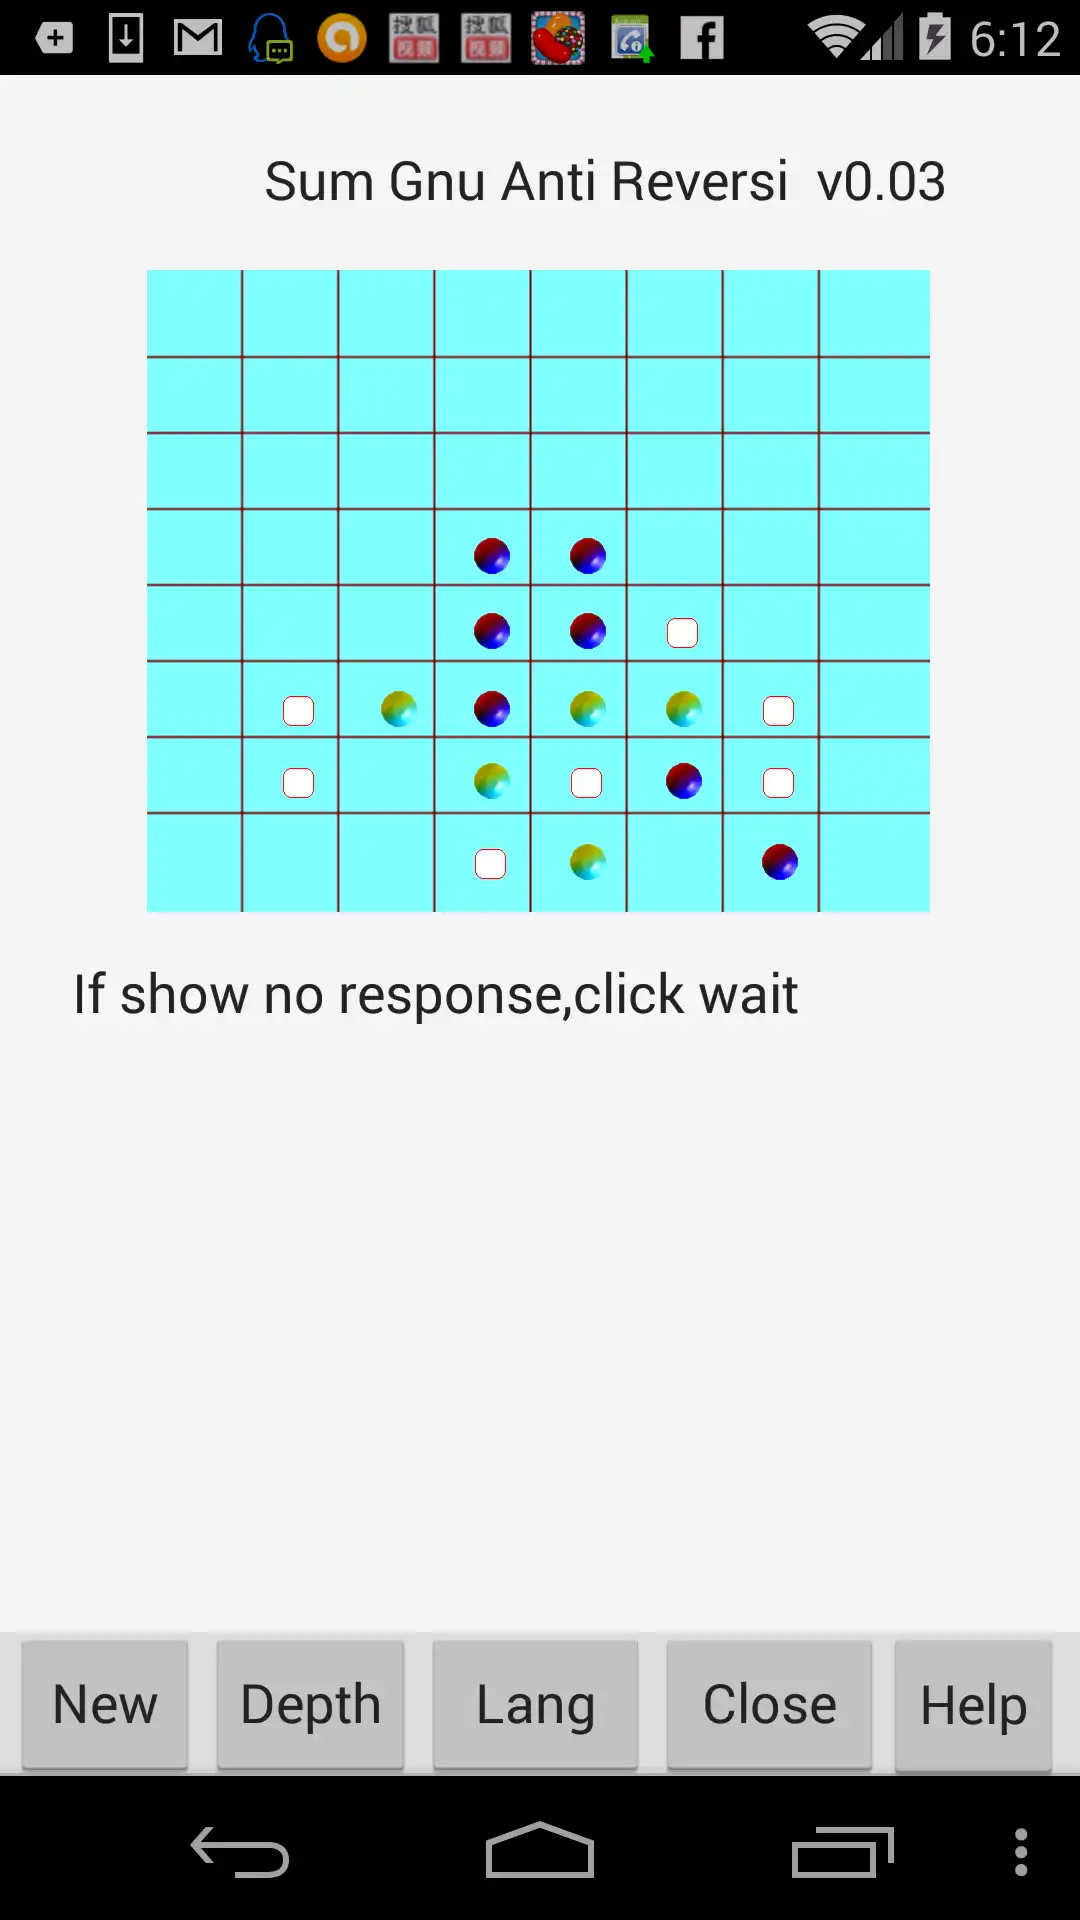 Download web tool or web app sum gnu anti reversi 8x8 - Android to run in Linux online